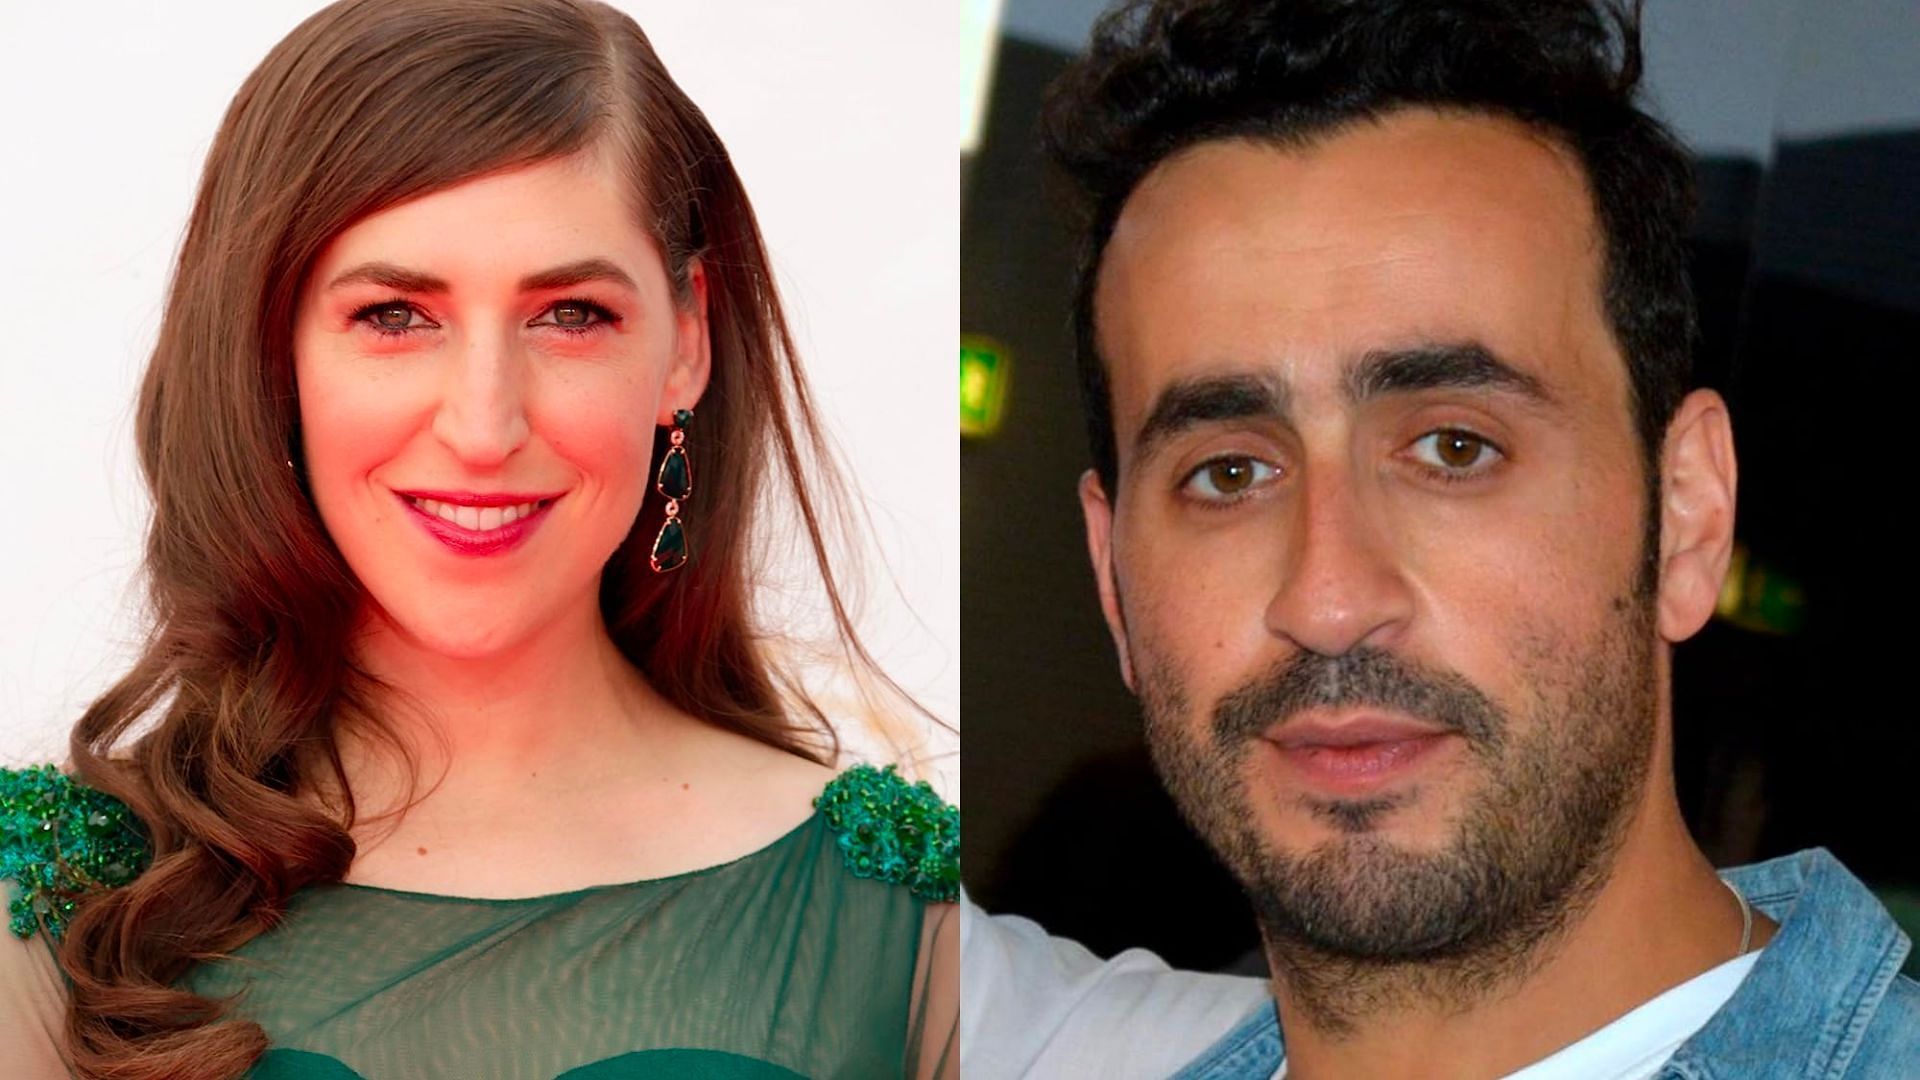 (L) Mayim Bialik is now dating (R) Jonathan Cohen (Images via IMDb)